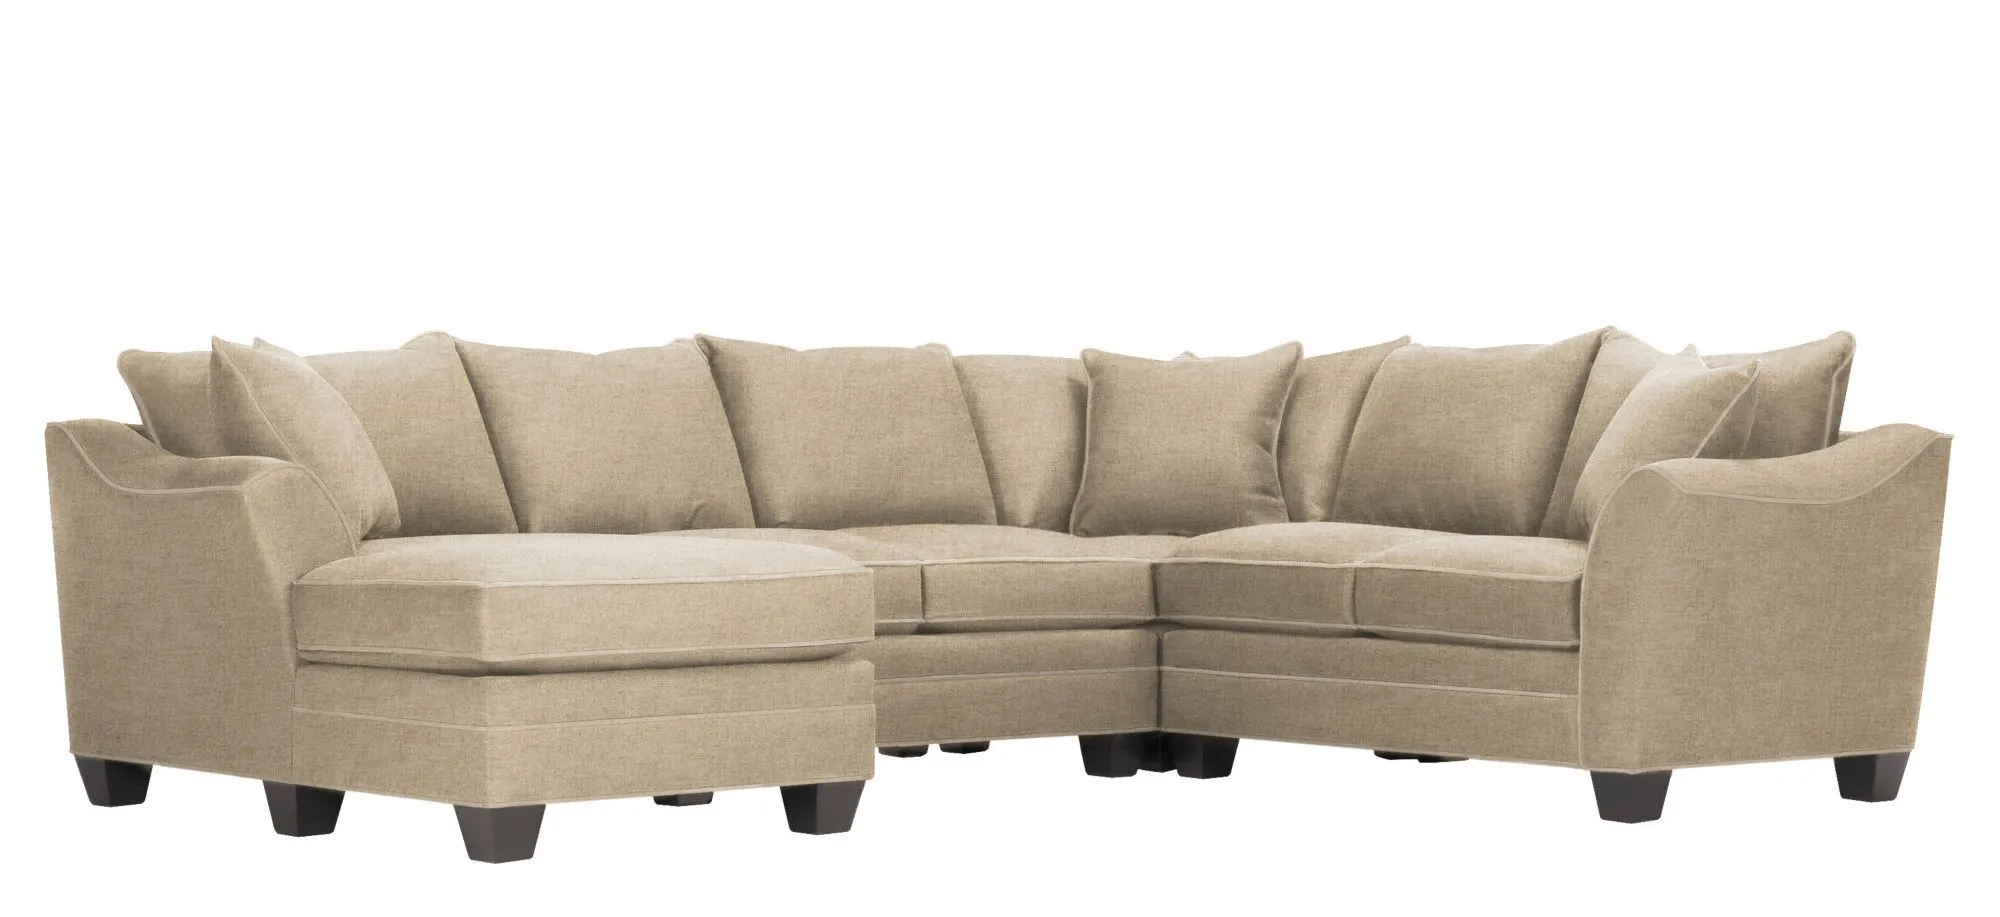 Foresthill 4-pc. Left Hand Chaise Sectional Sofa in Santa Rosa Linen by H.M. Richards